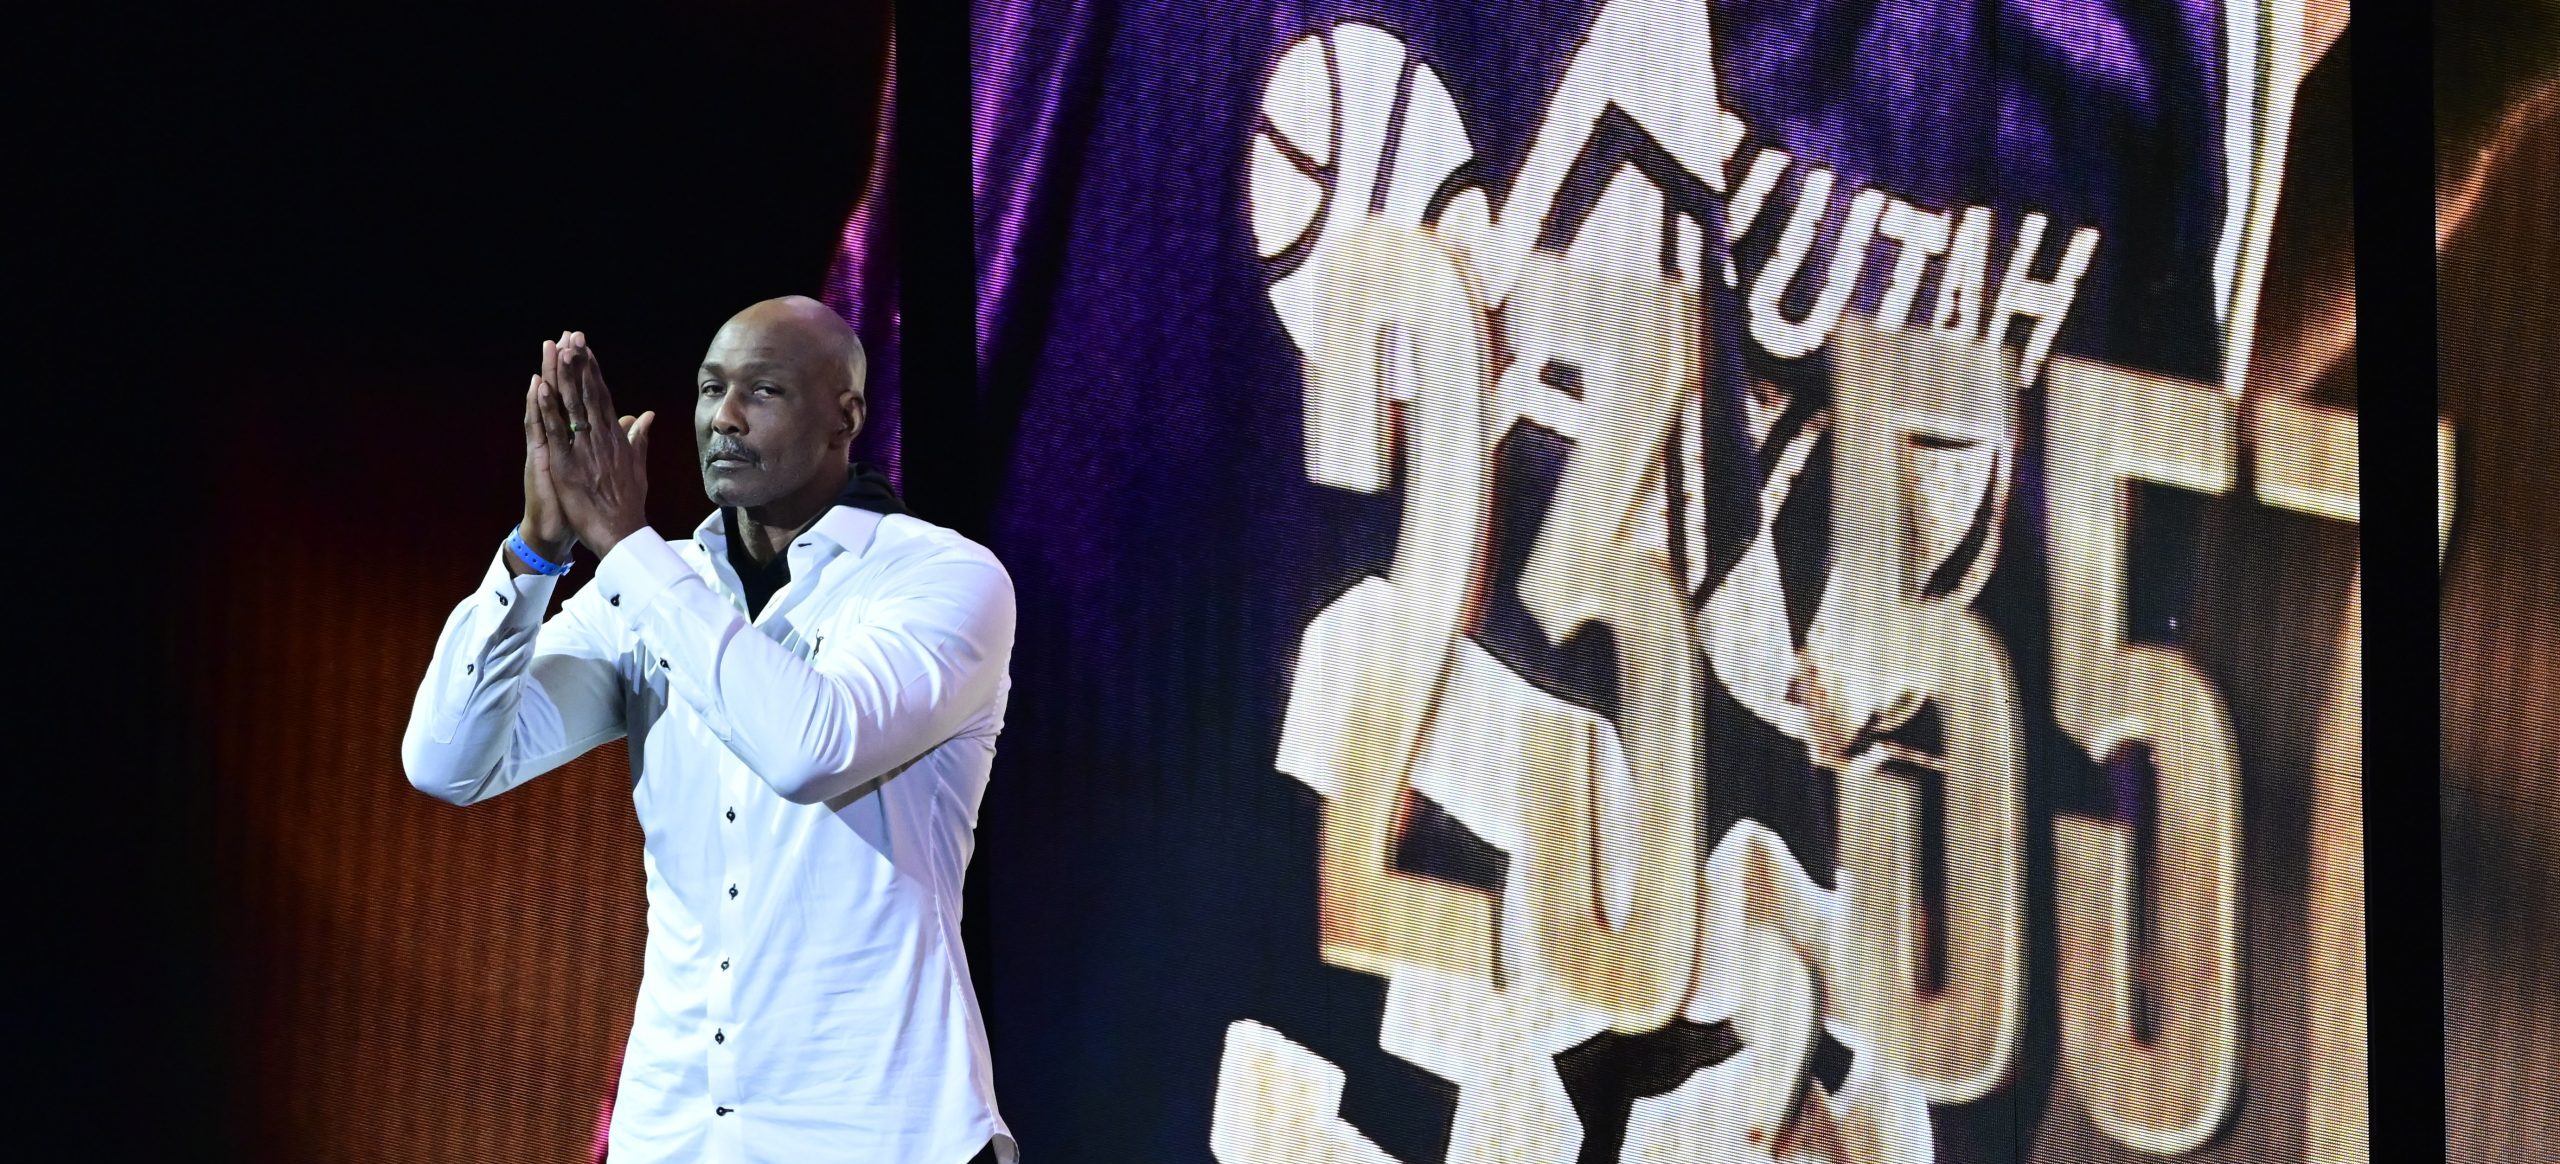 Former NBA player Karl Malone acknowledges the crowd